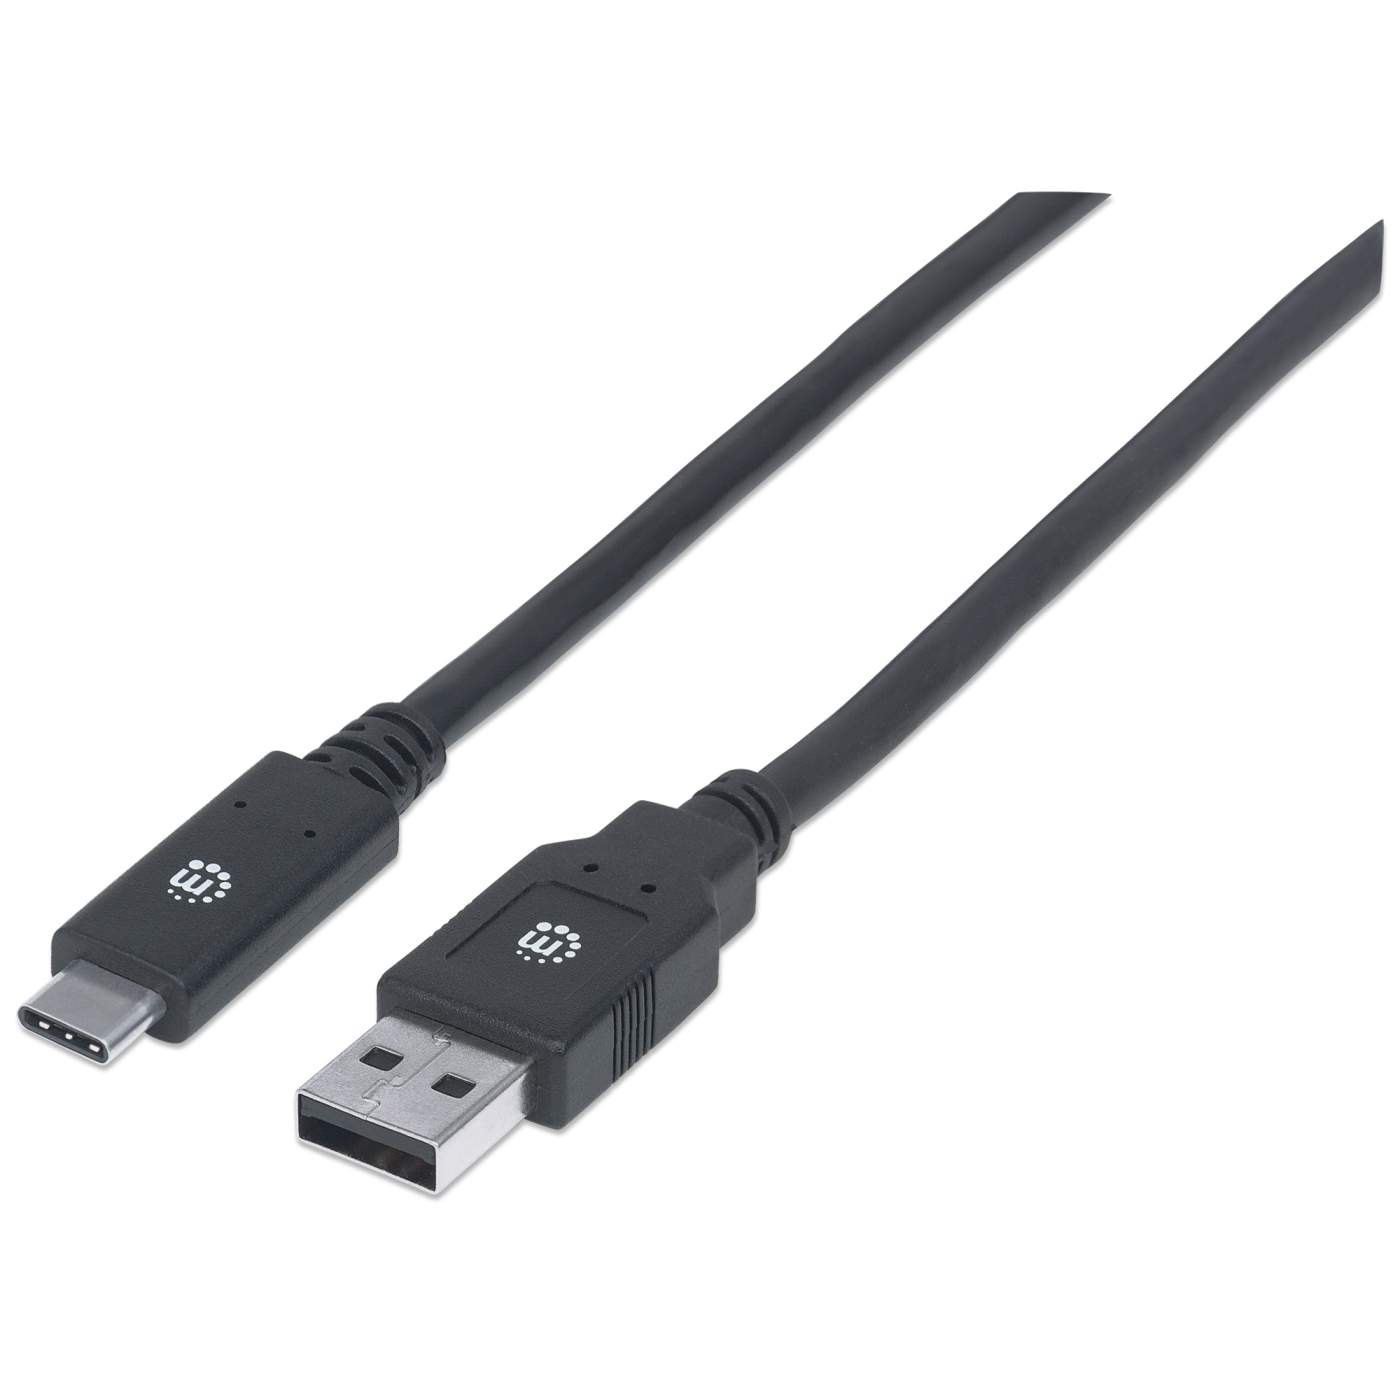 USB 3.0 Type-A to Type-C Device Cable